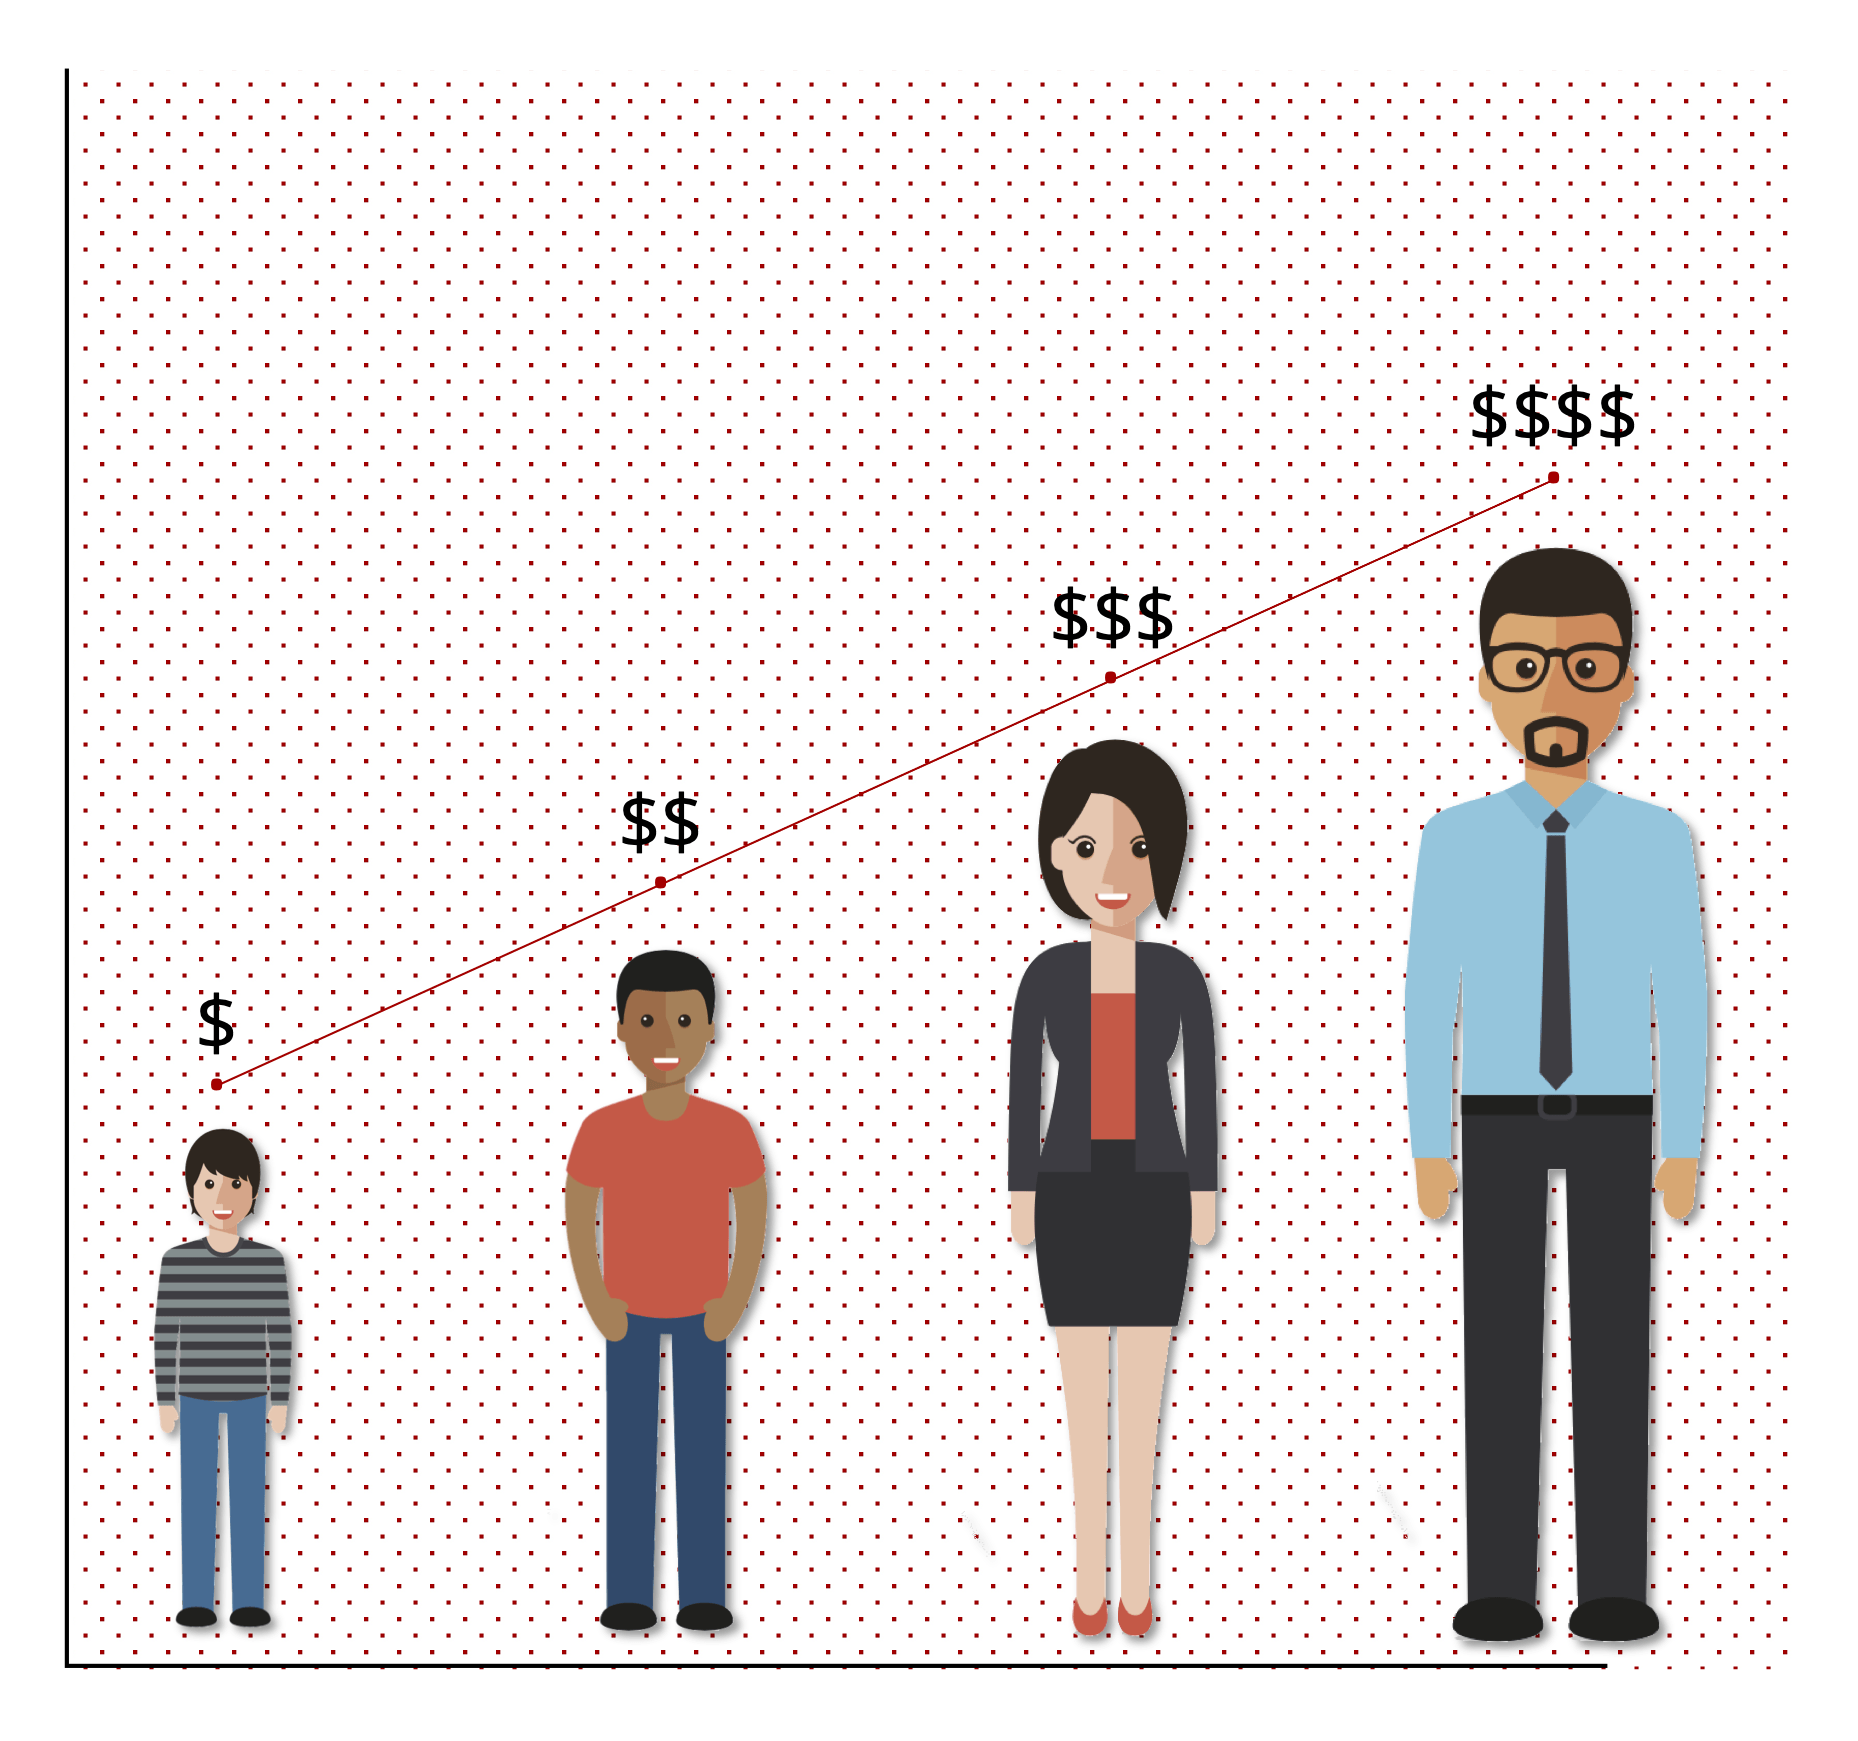 A man and a woman are standing next to each other with a graph showing their heights.